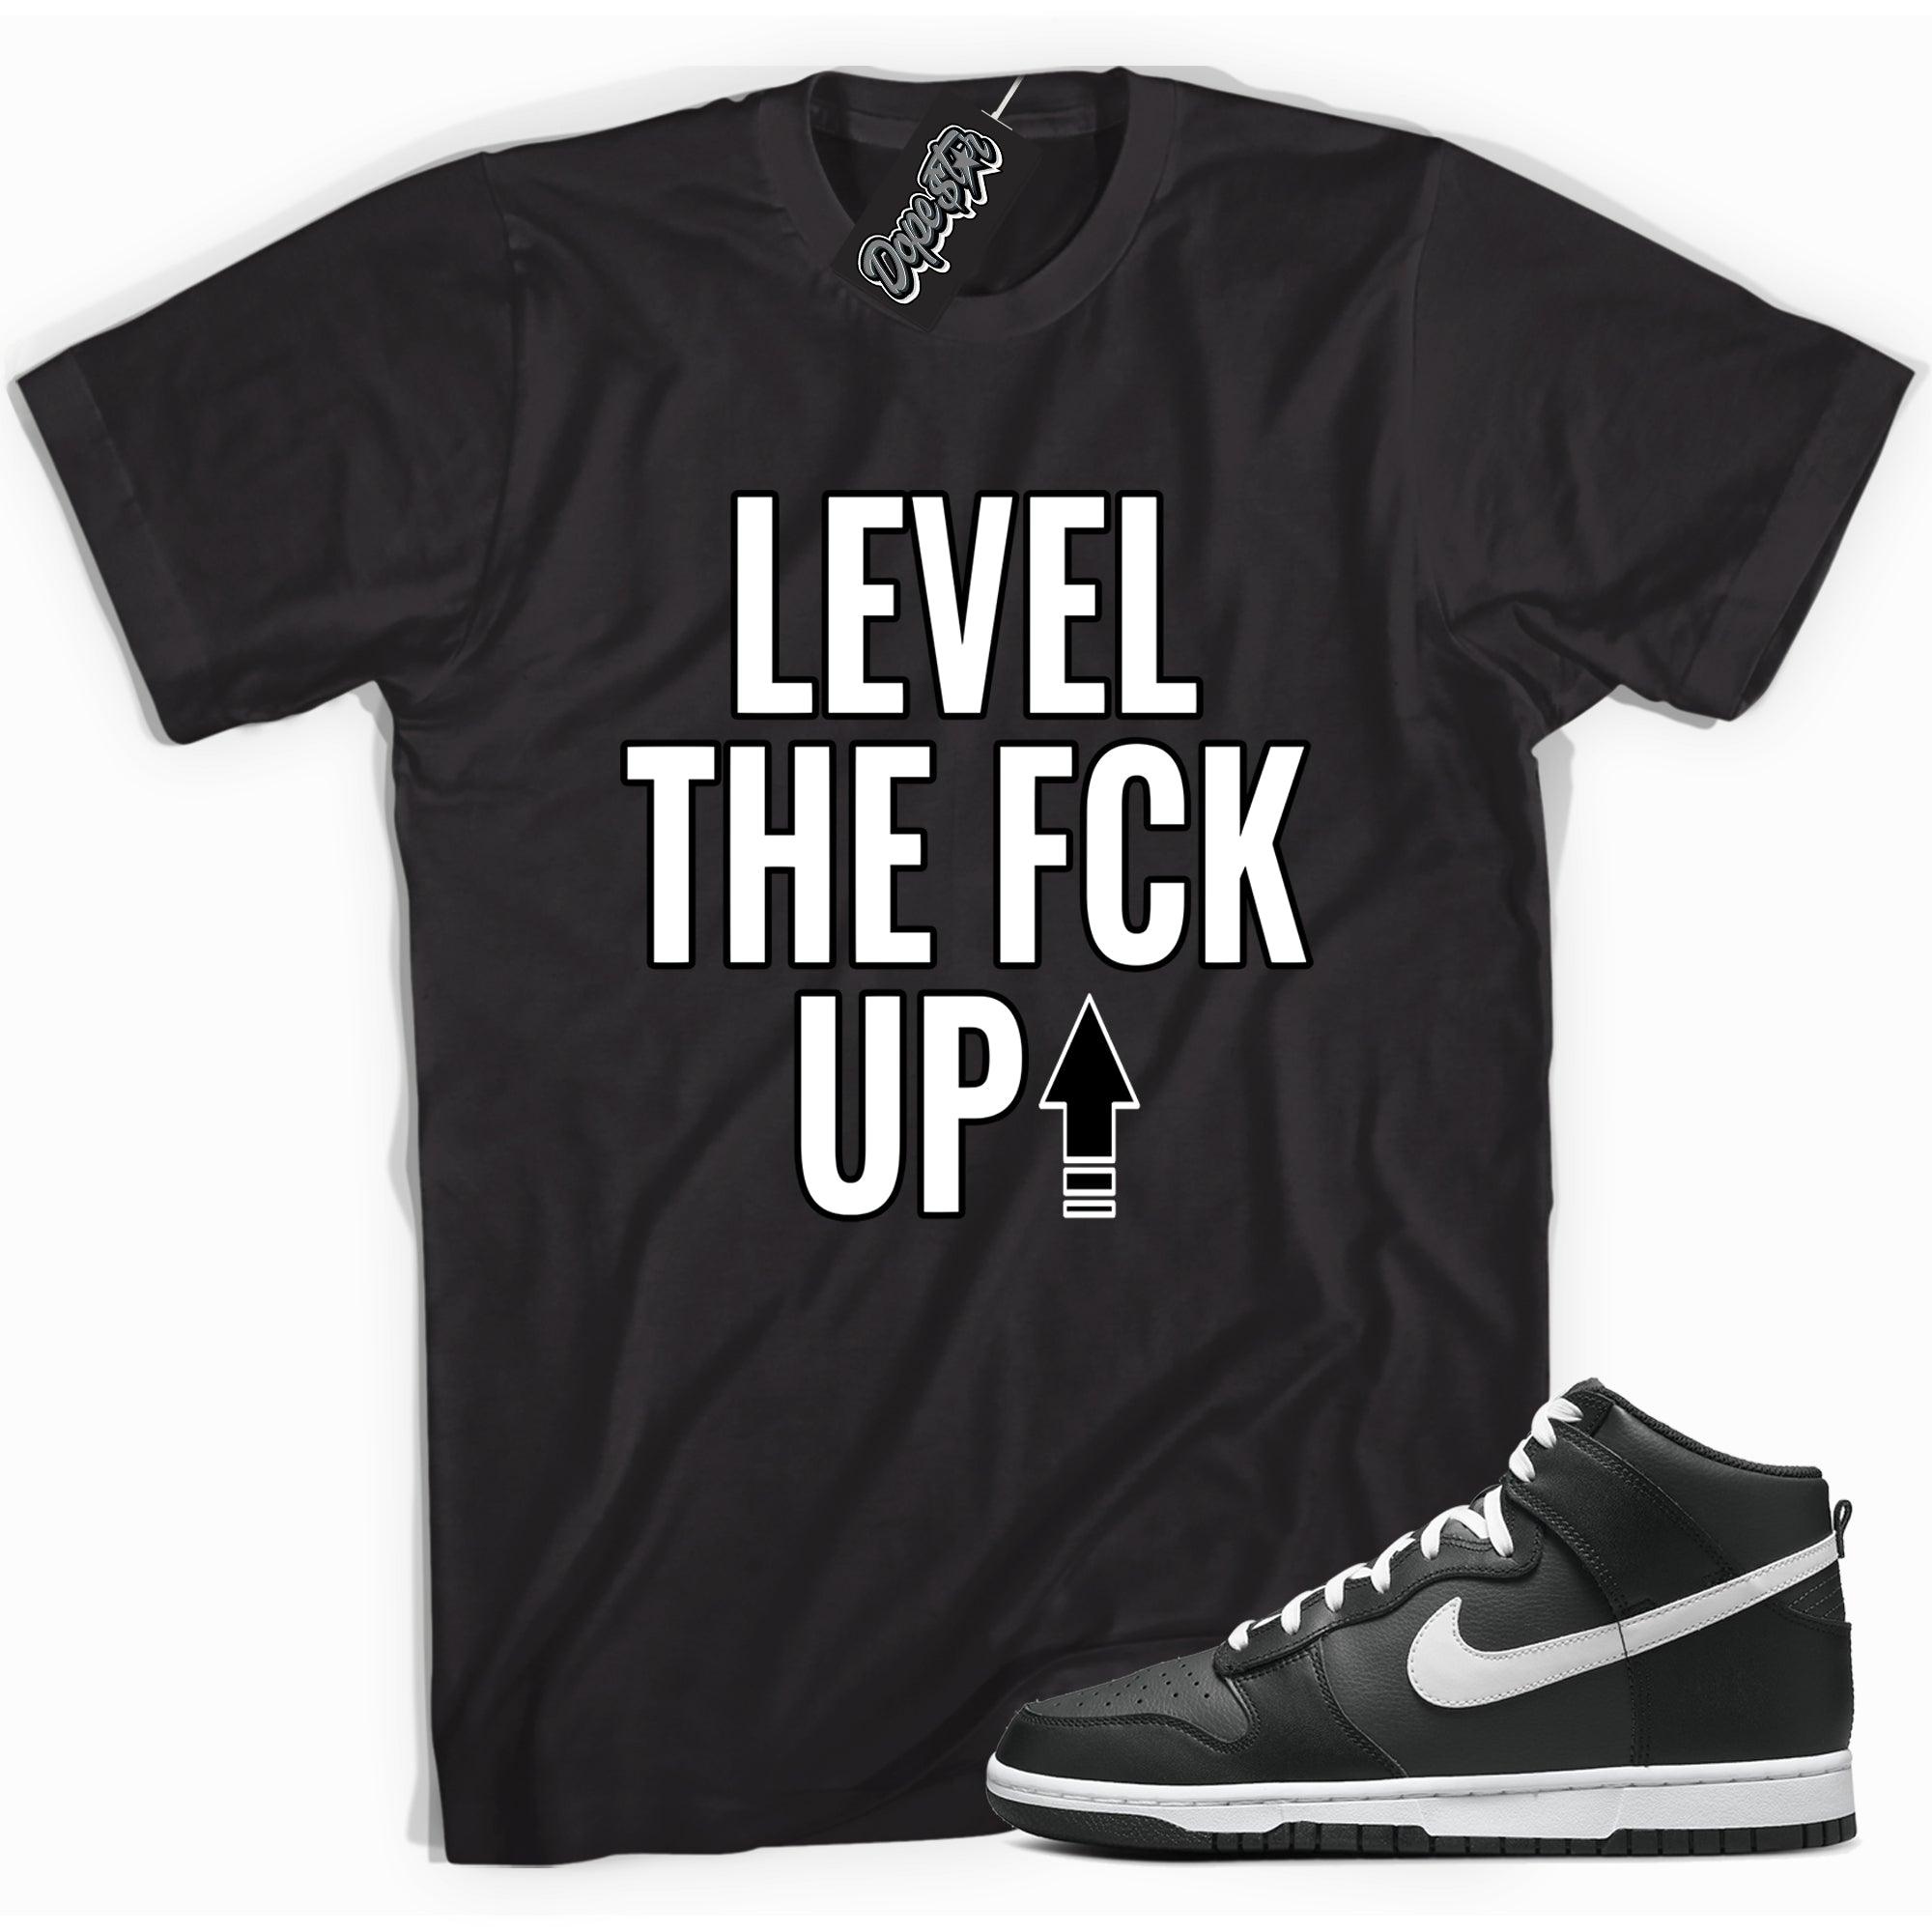 Cool black graphic tee with 'level up' print, that perfectly matches Nike Dunk High Anthracite White sneakers.